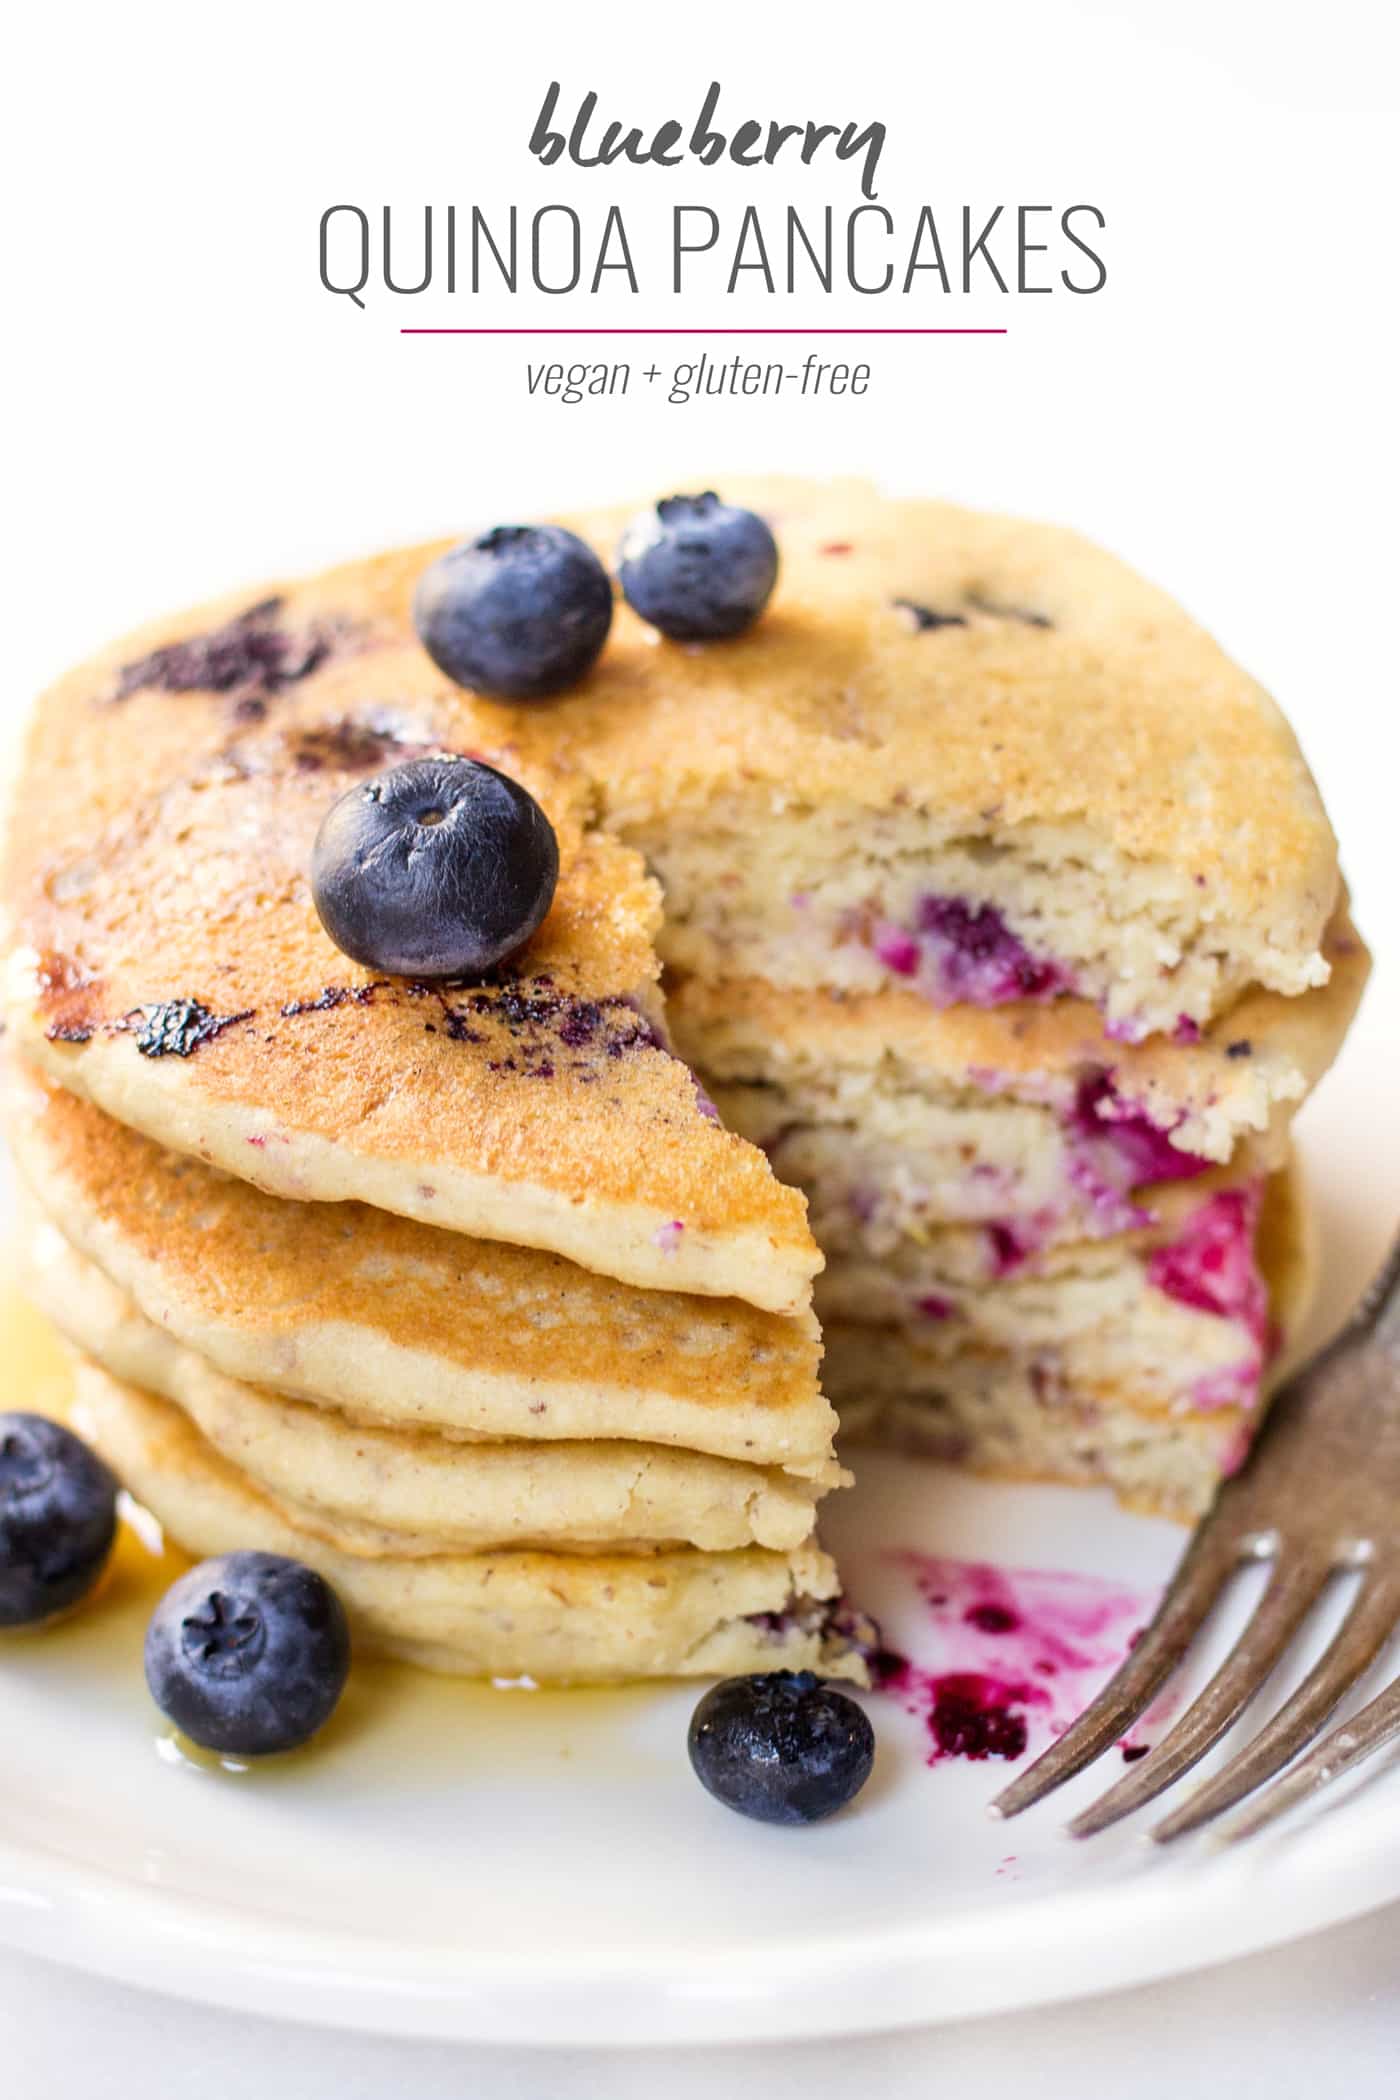 VEGAN BLUEBERRY QUINOA PANCAKES -- light, fluffy and perfectly tender. They're the ULTIMATE breakfast treat!